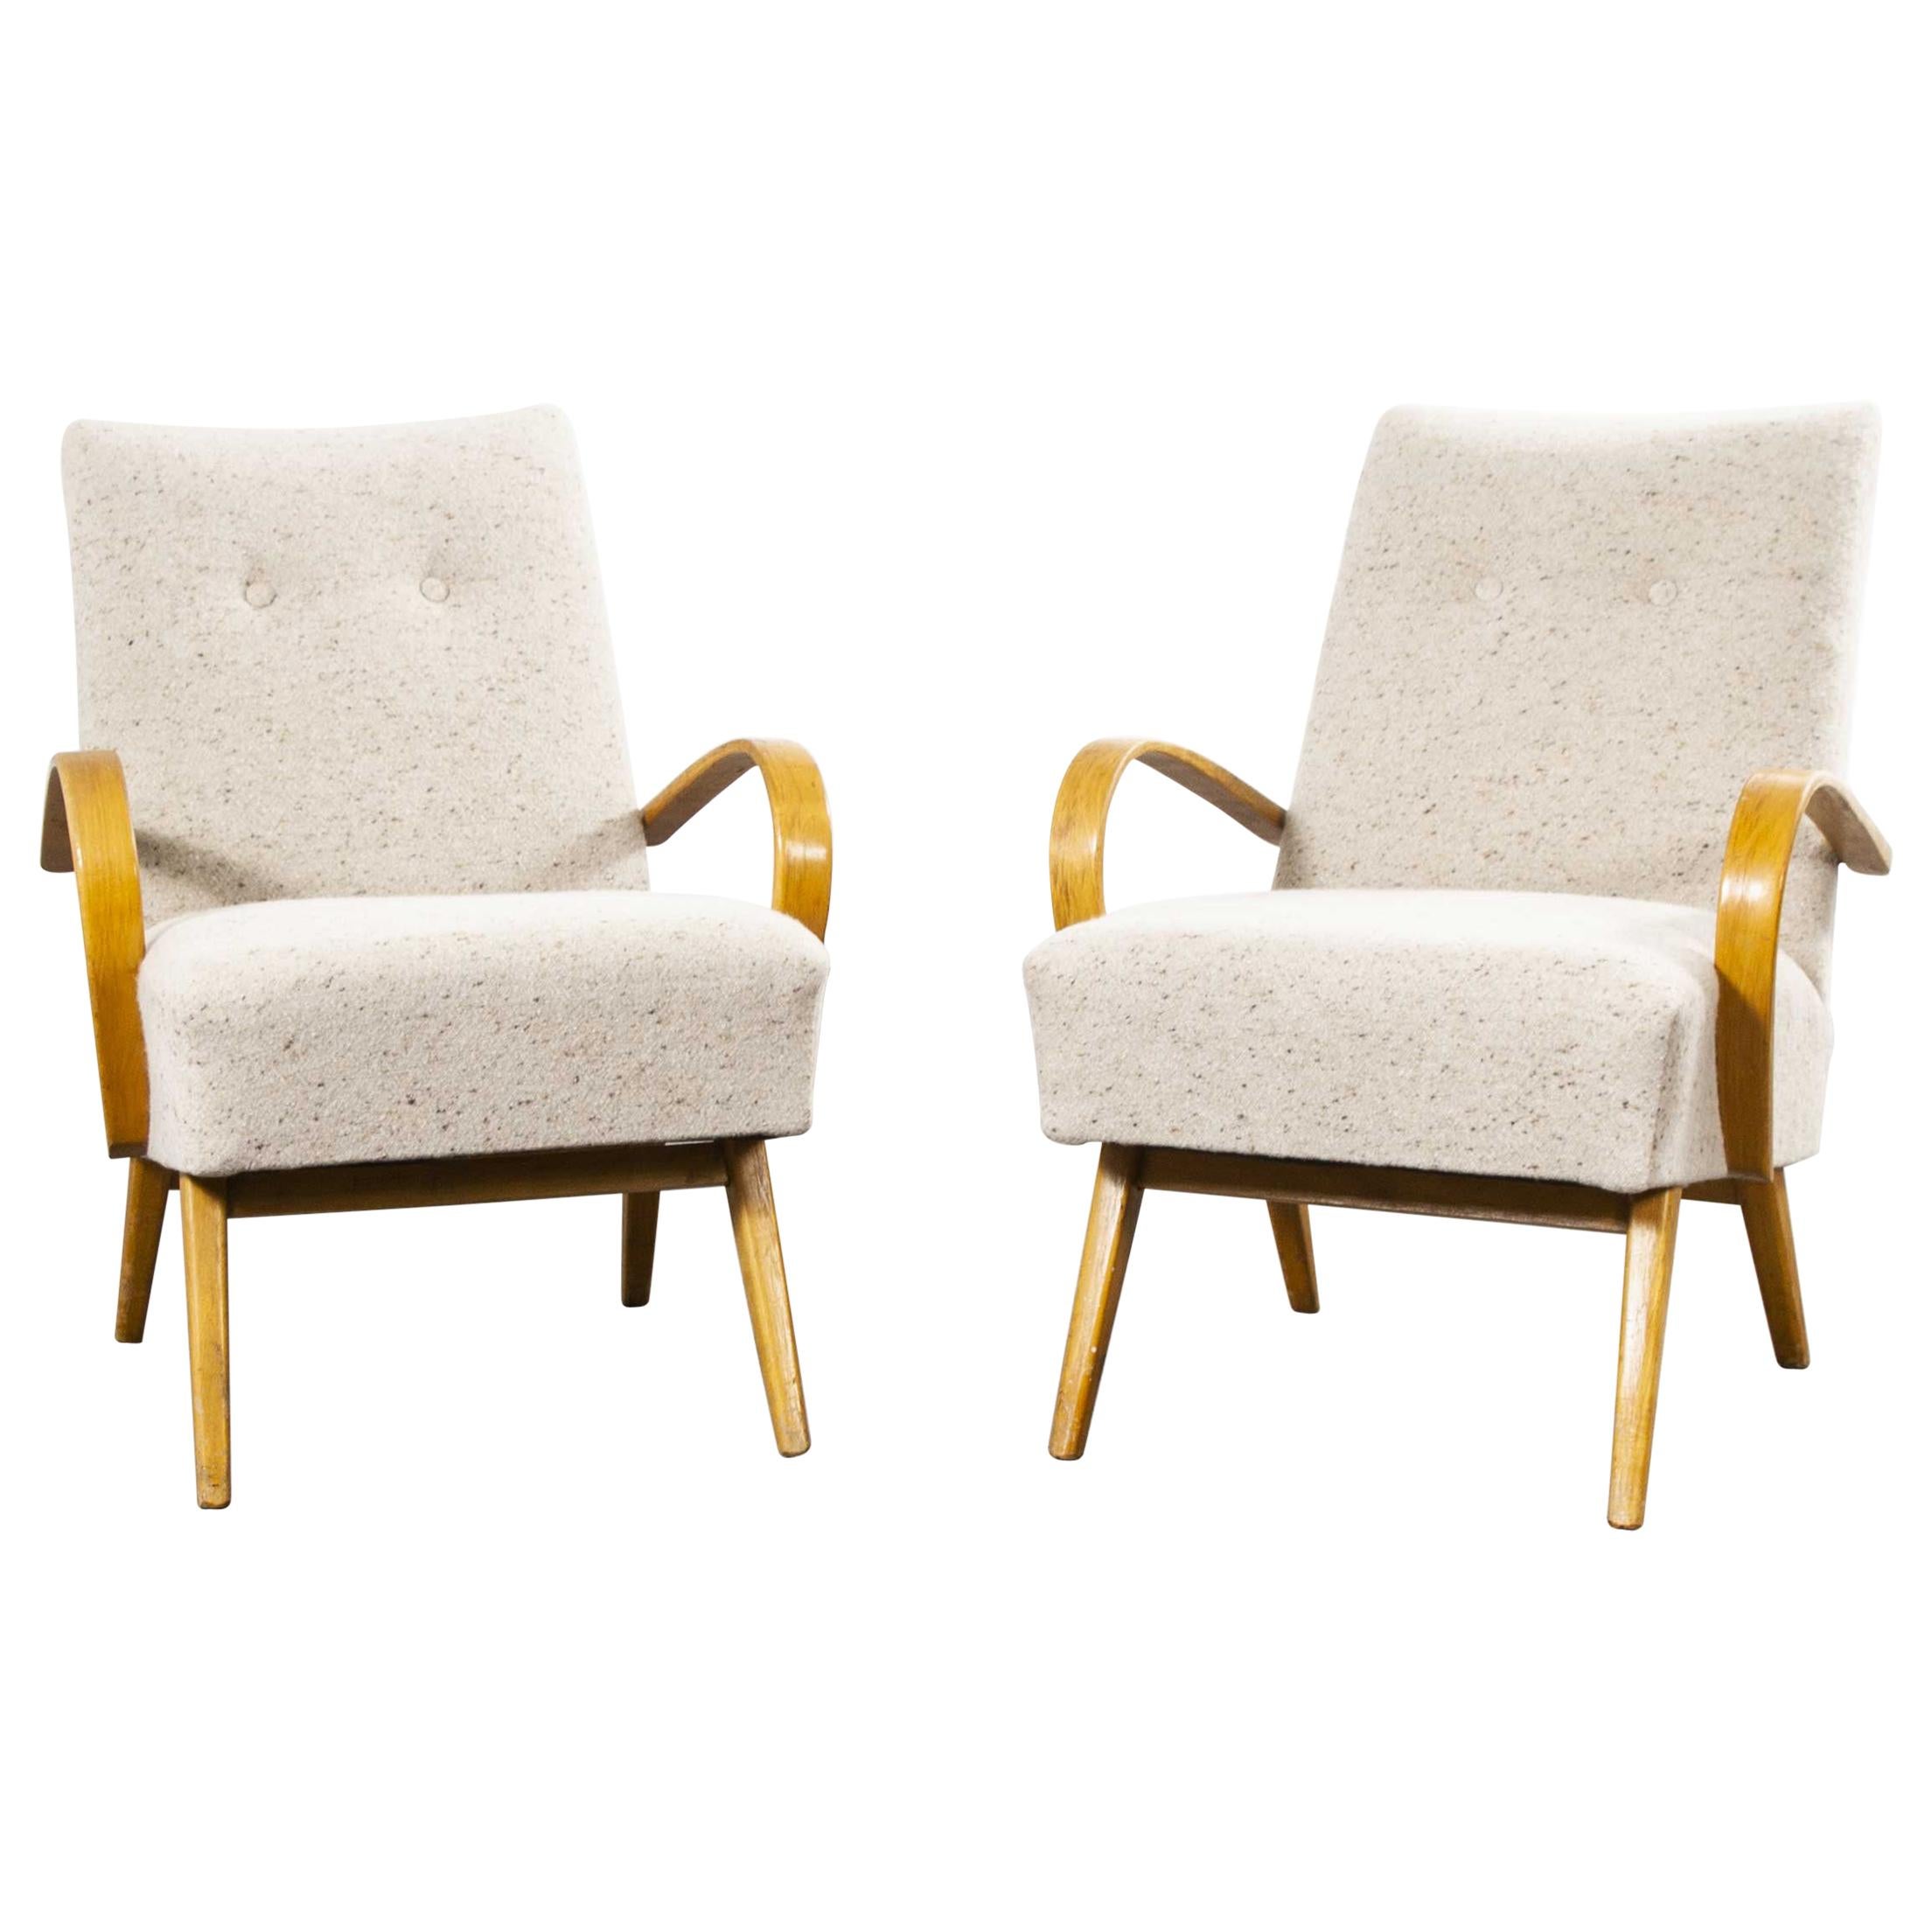 1950s Pair of Boucle Wool Upholstered Armchairs, Jindrich Halabala